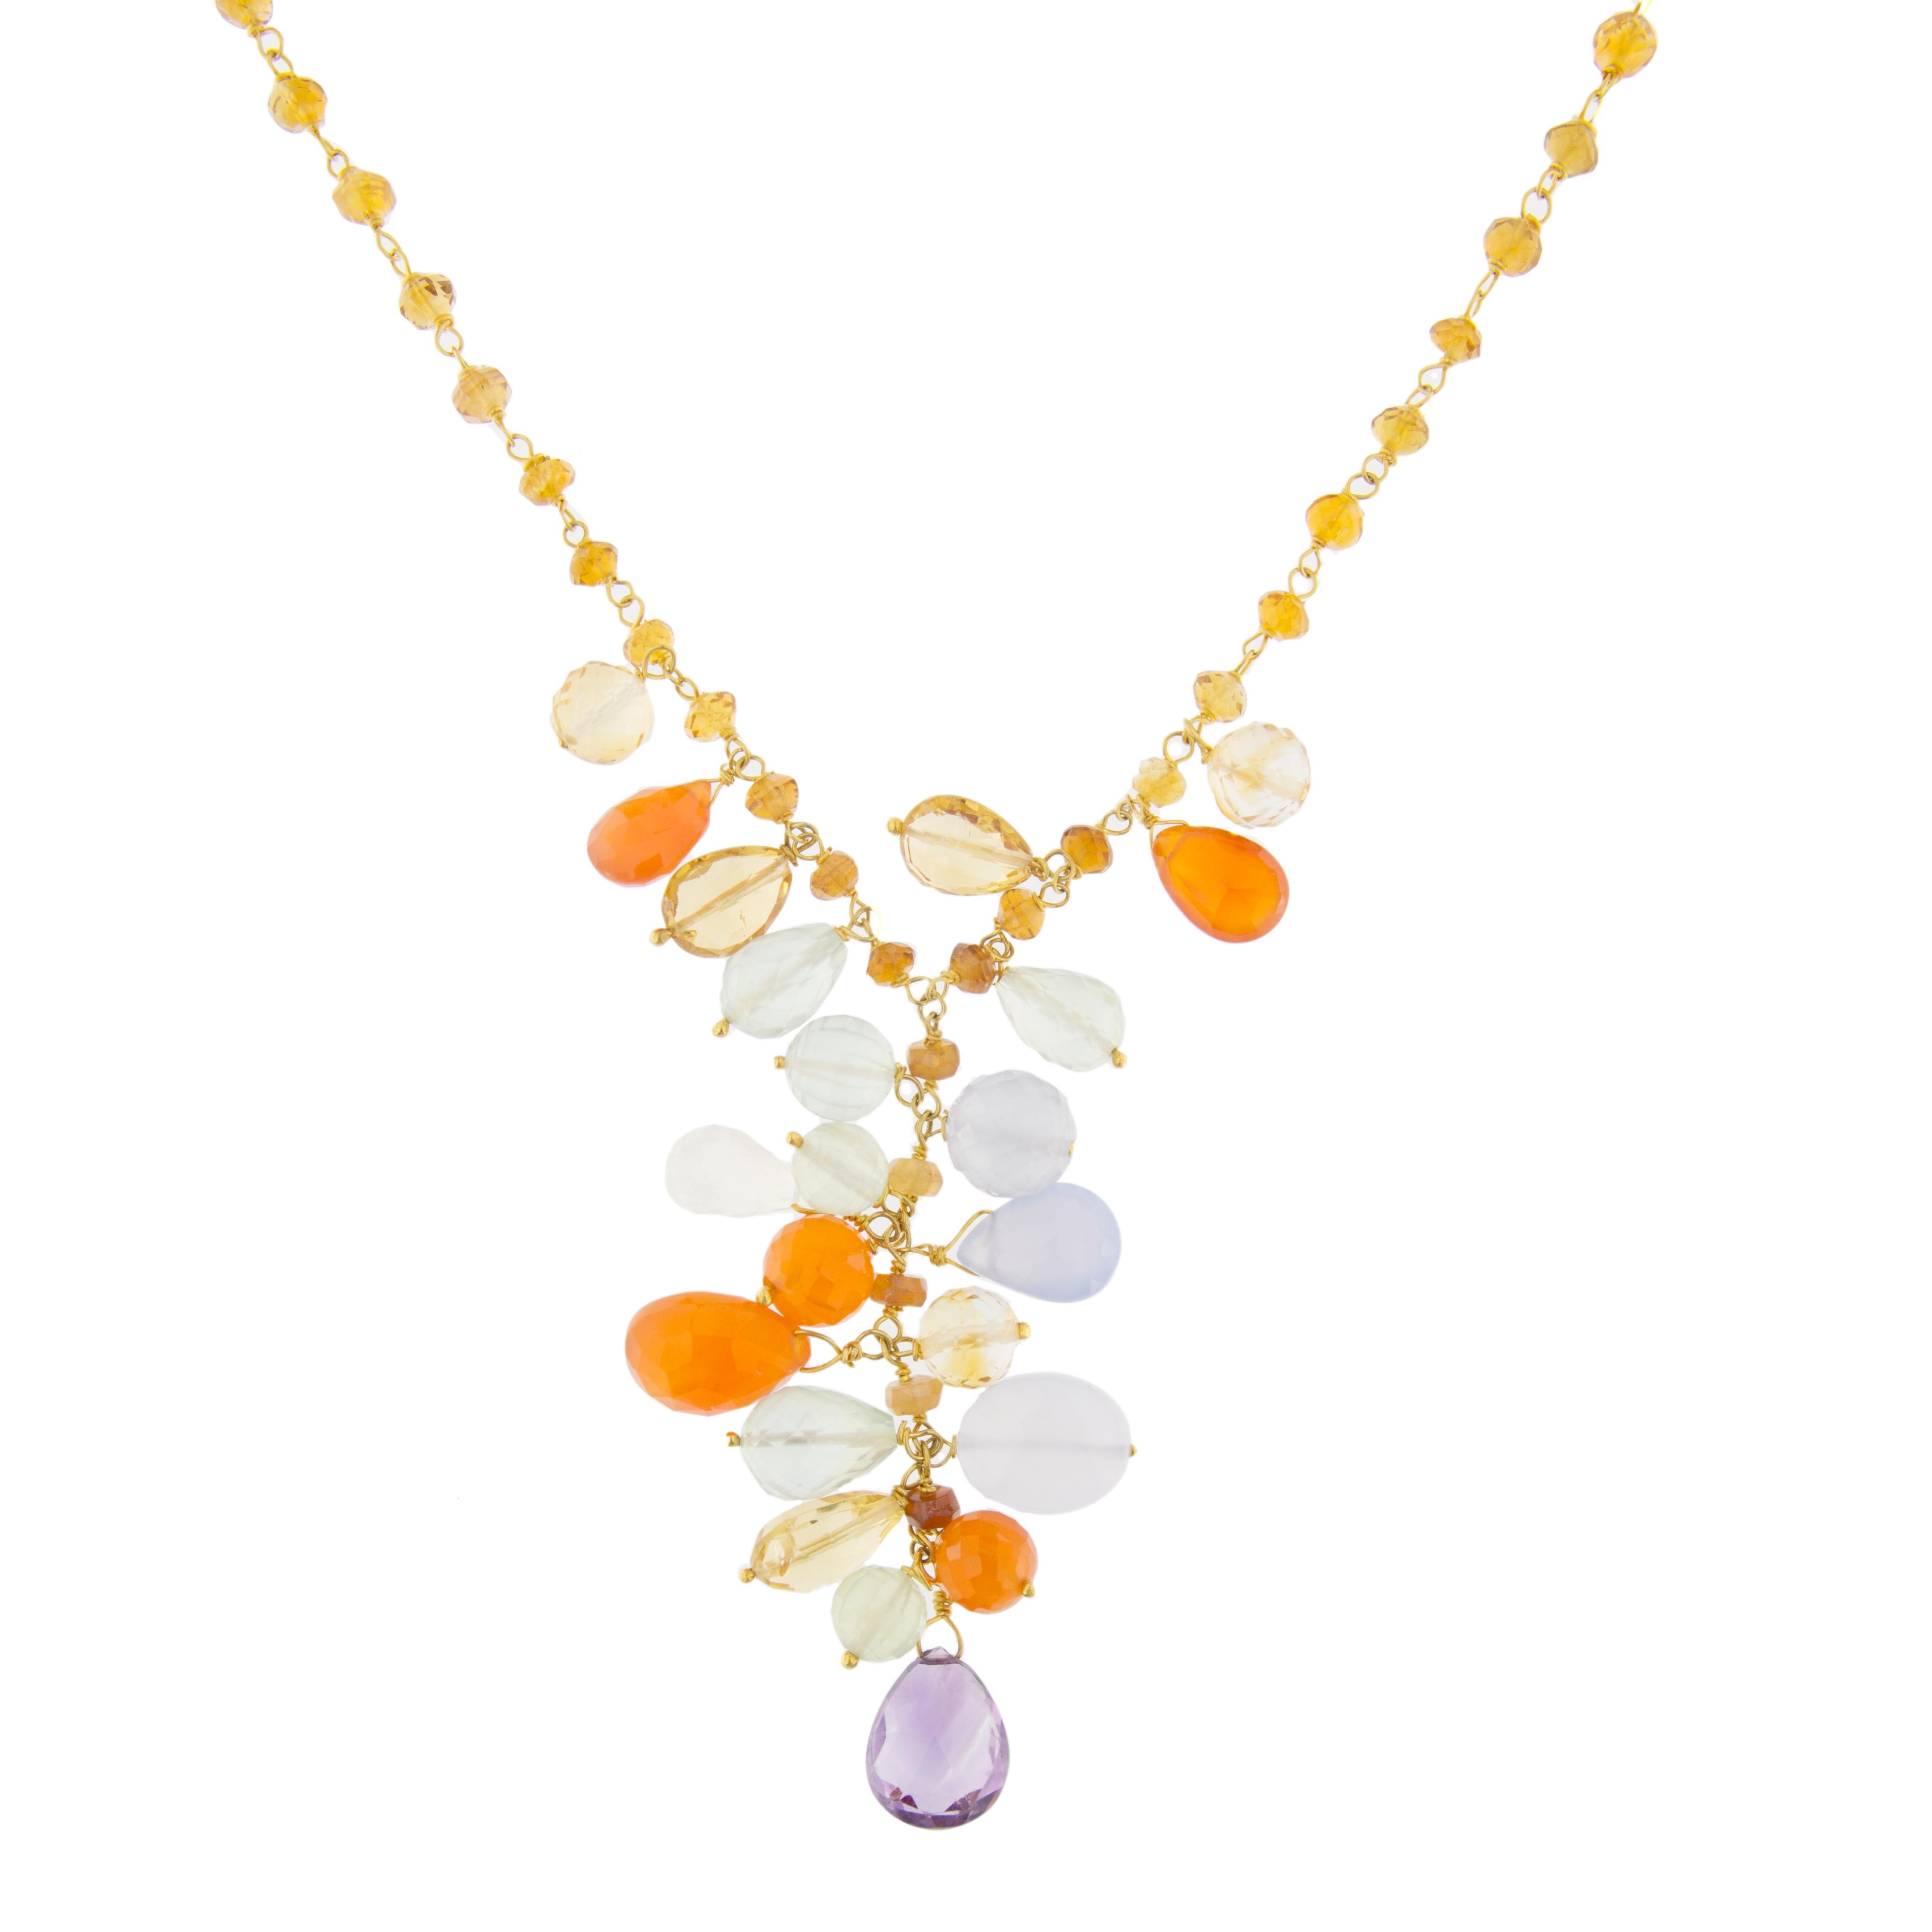 Jona design collection, hand crafted in Italy, 18 karat yellow gold necklace featuring 89,50 carats of briolette cut Amethyst, Chalcedony, Carnelian and Citrine.

All Jona jewelry is new and has never been previously owned or worn. Each item will